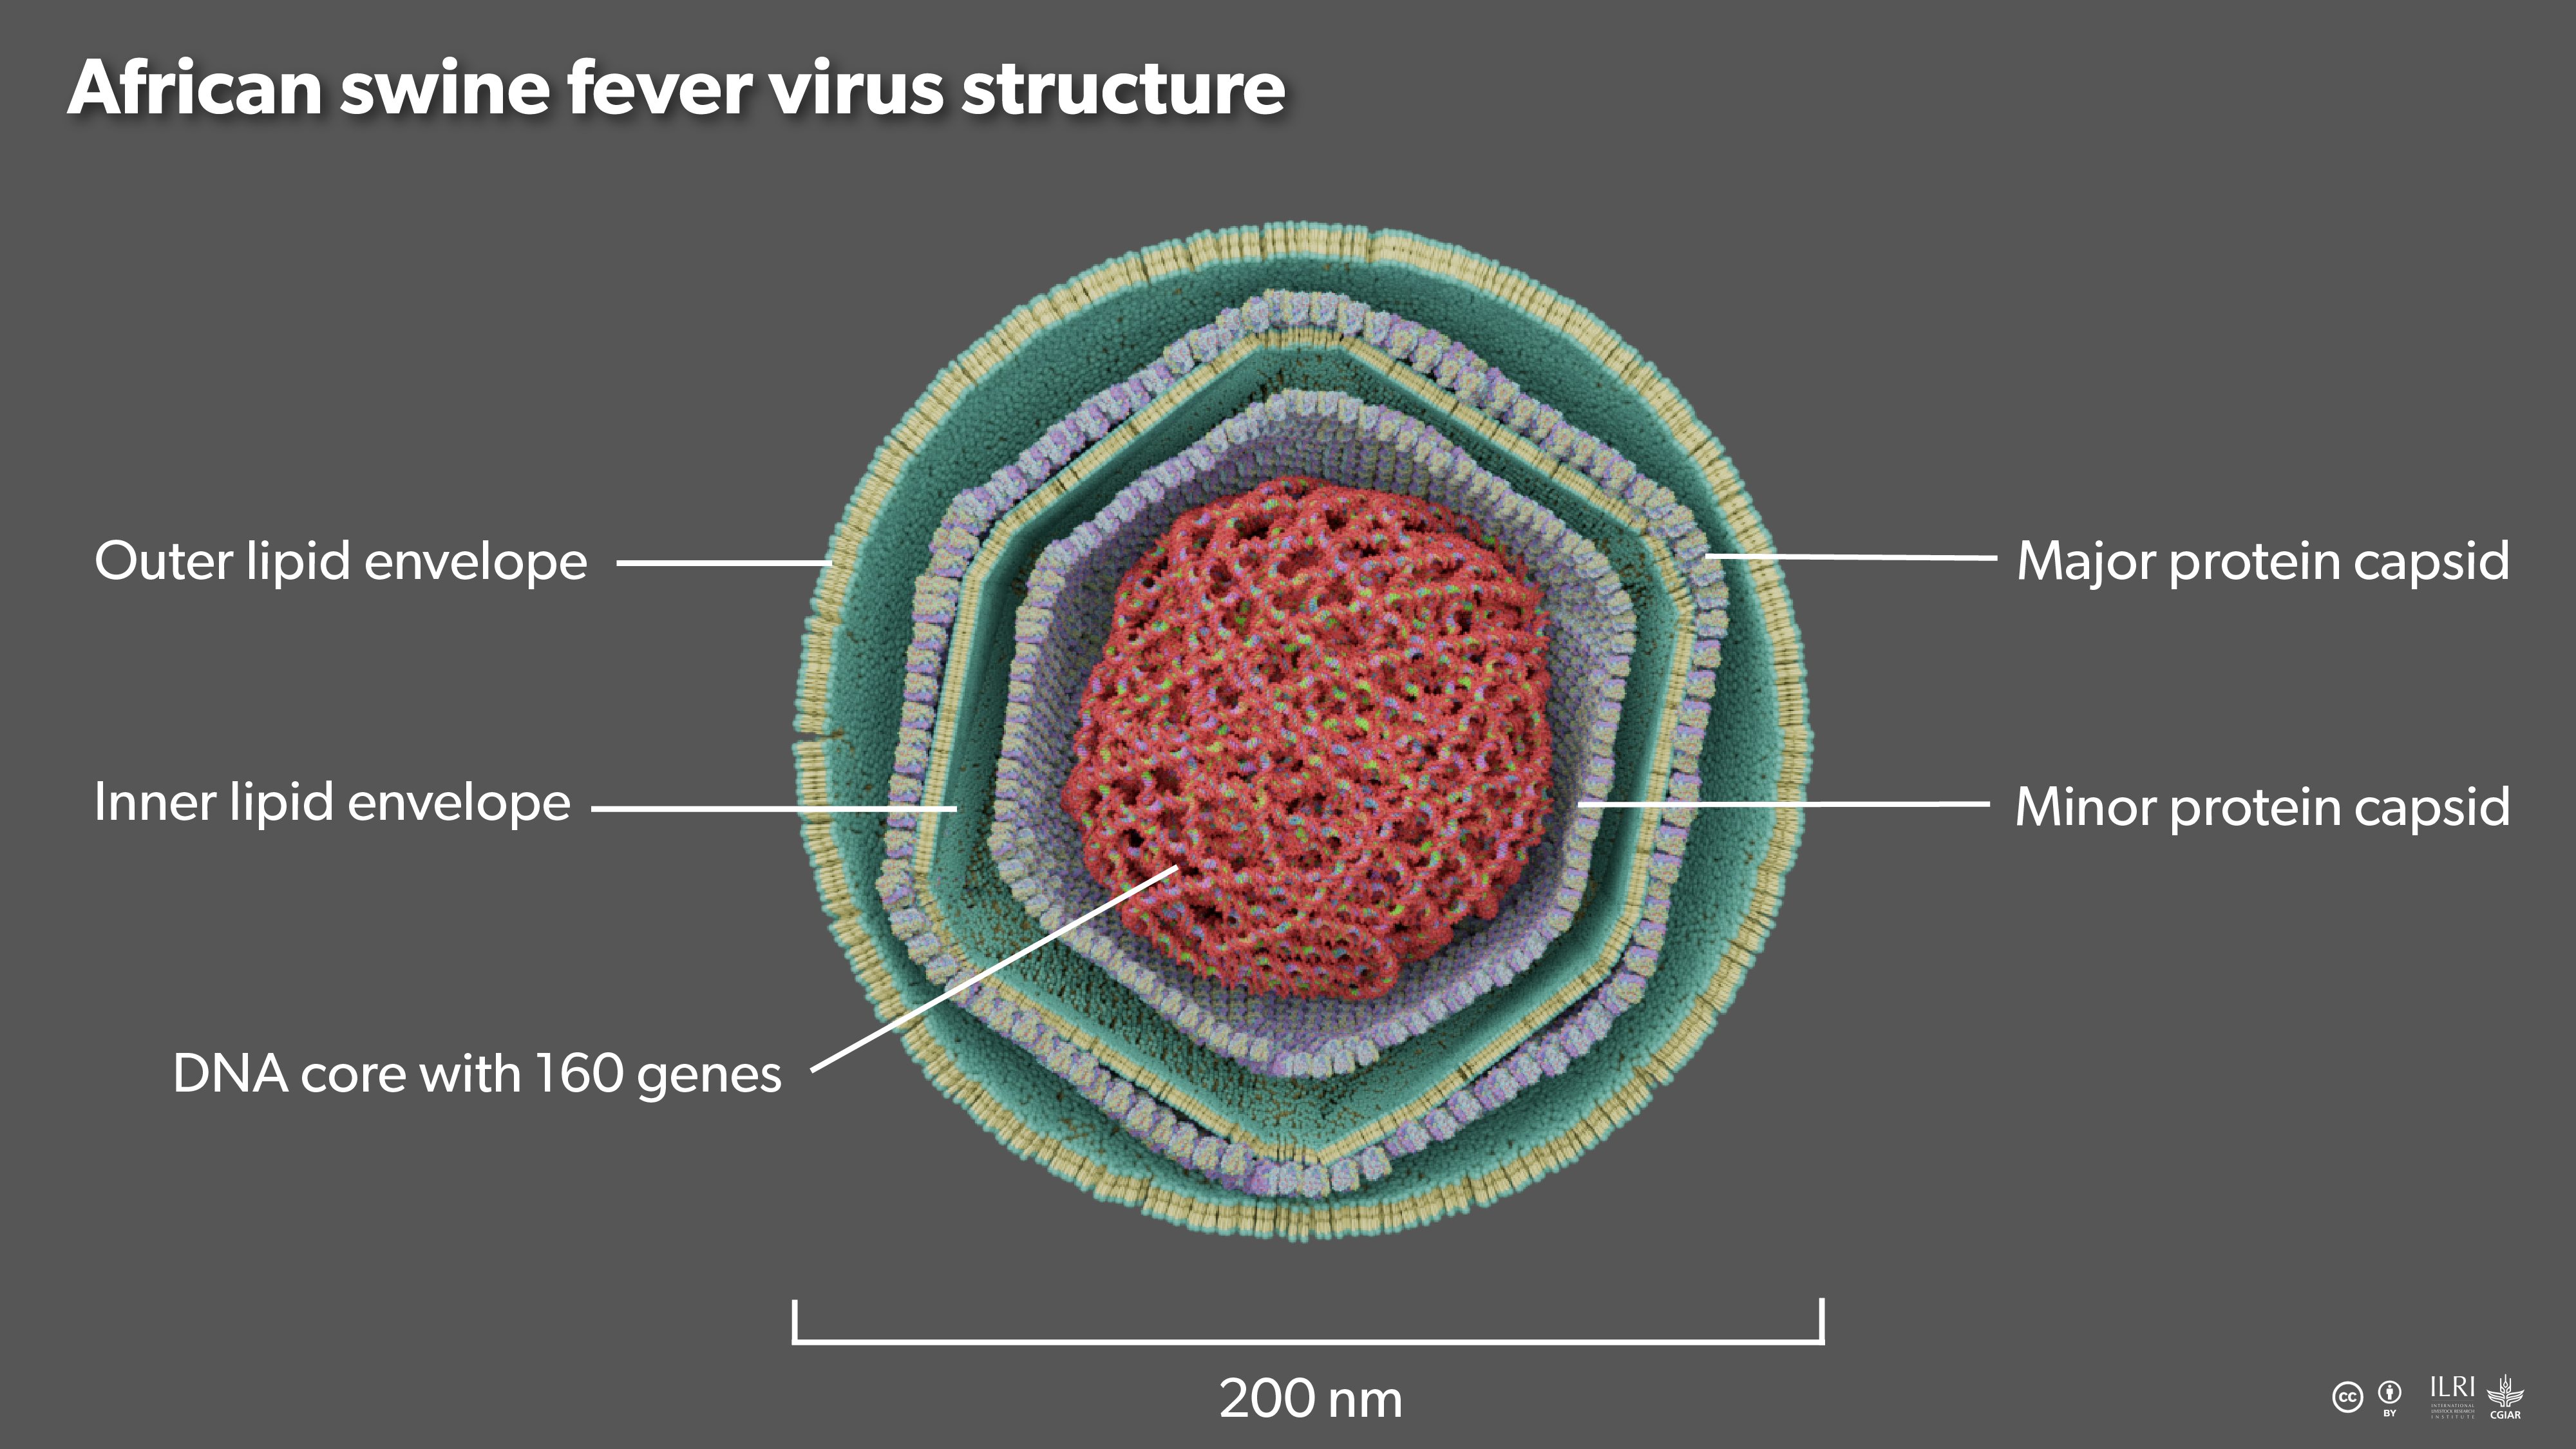 ASF virus structure